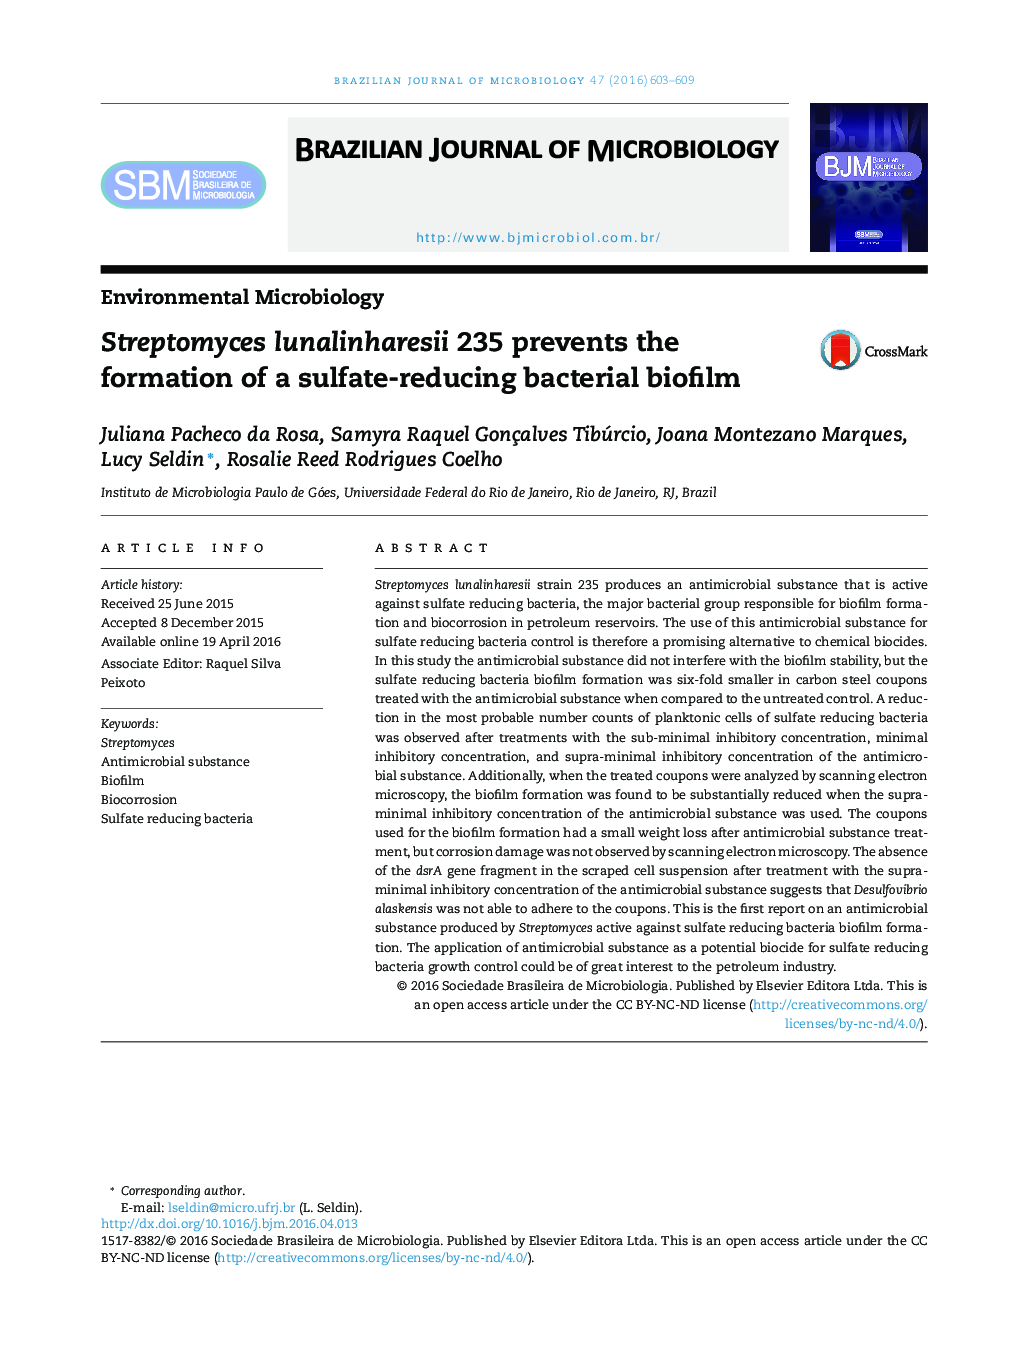 Streptomyces lunalinharesii 235 prevents the formation of a sulfate-reducing bacterial biofilm